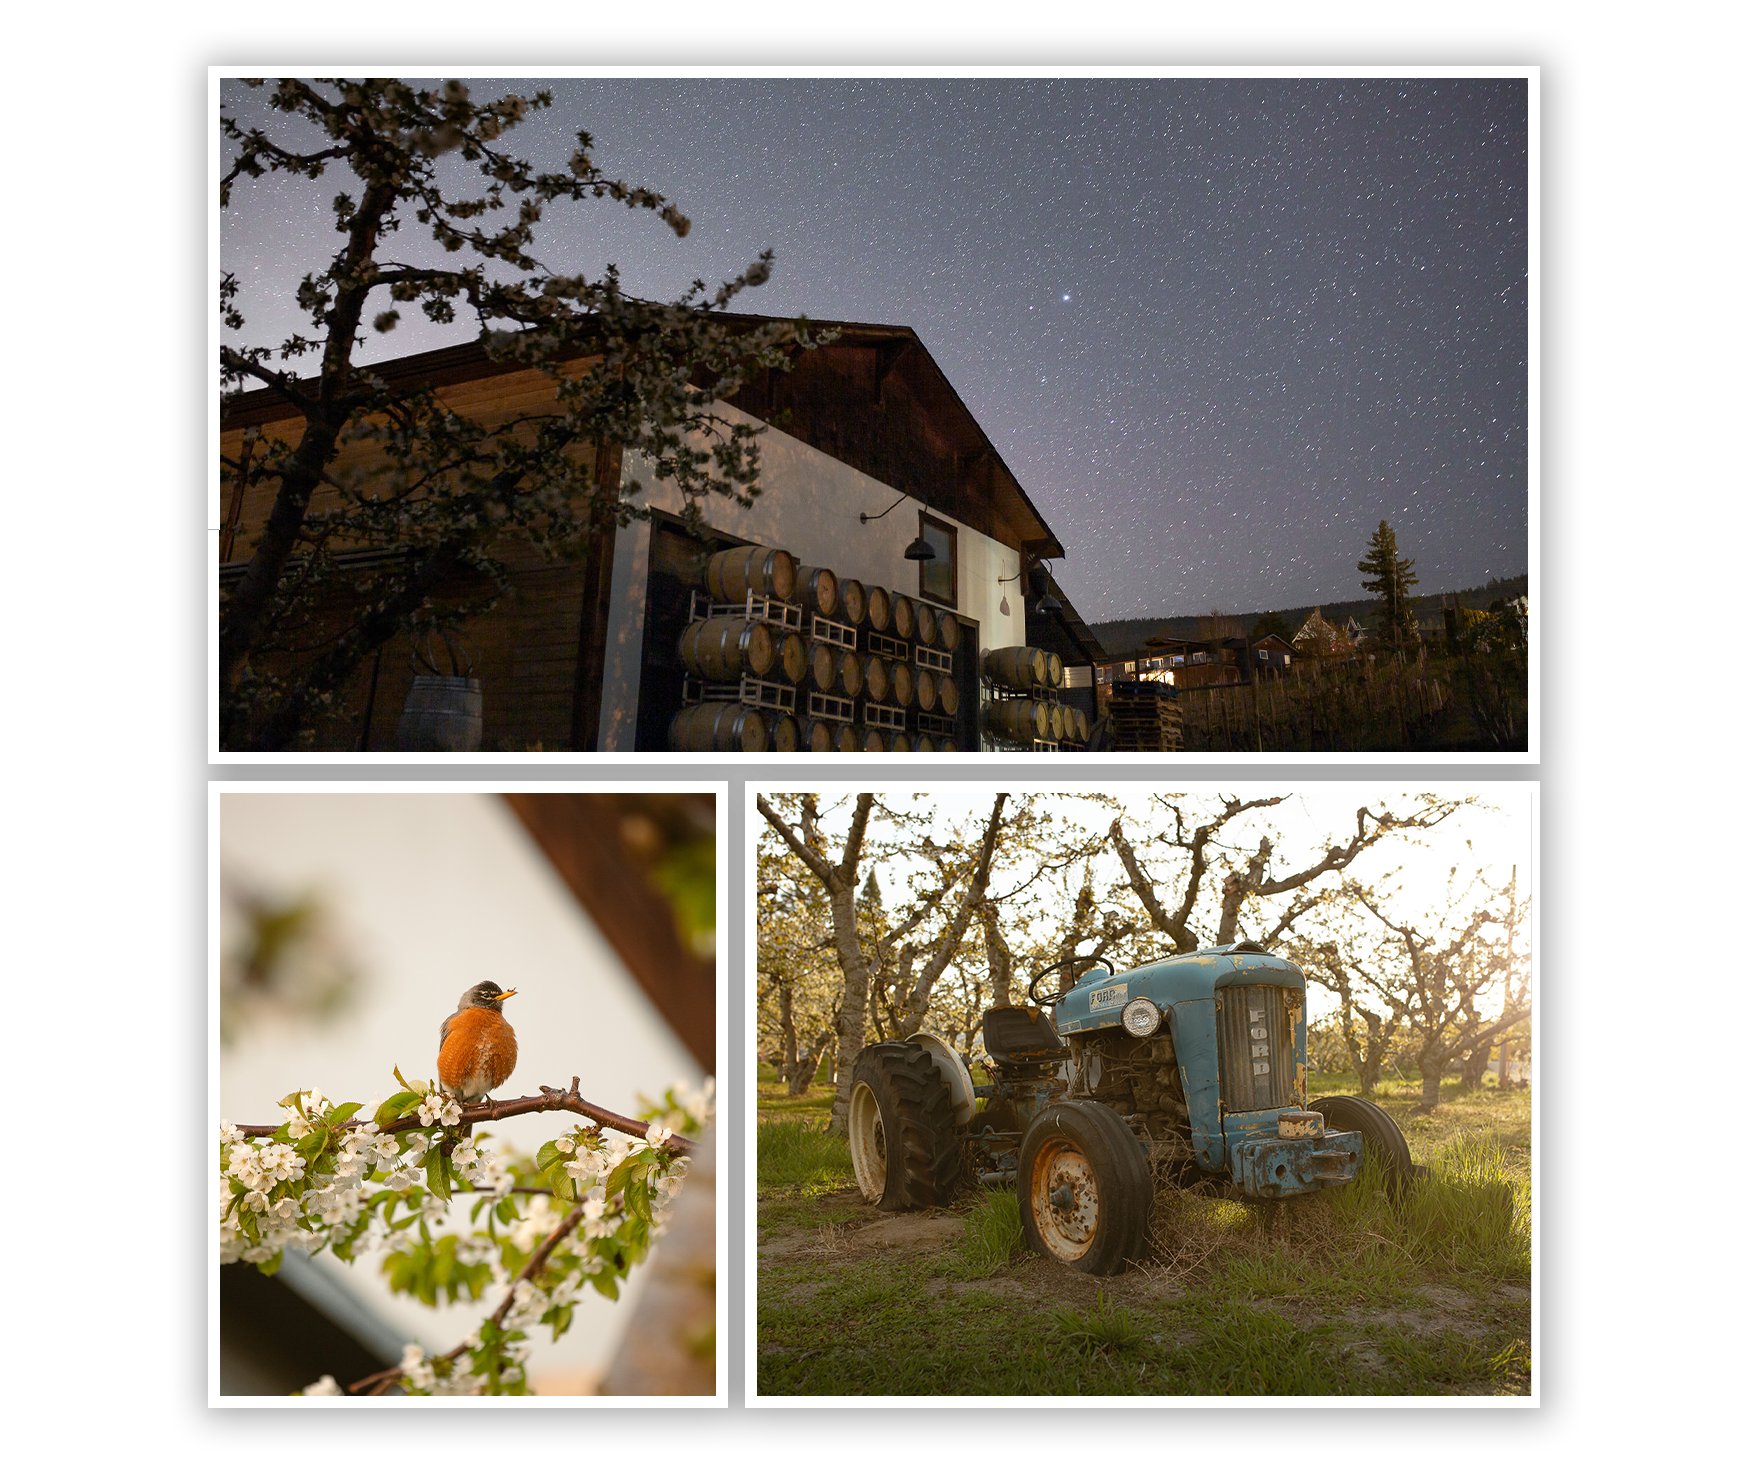 Trio of spring photos; exterior of the winery, a robin on s branch and a blue tractor in the vineyard